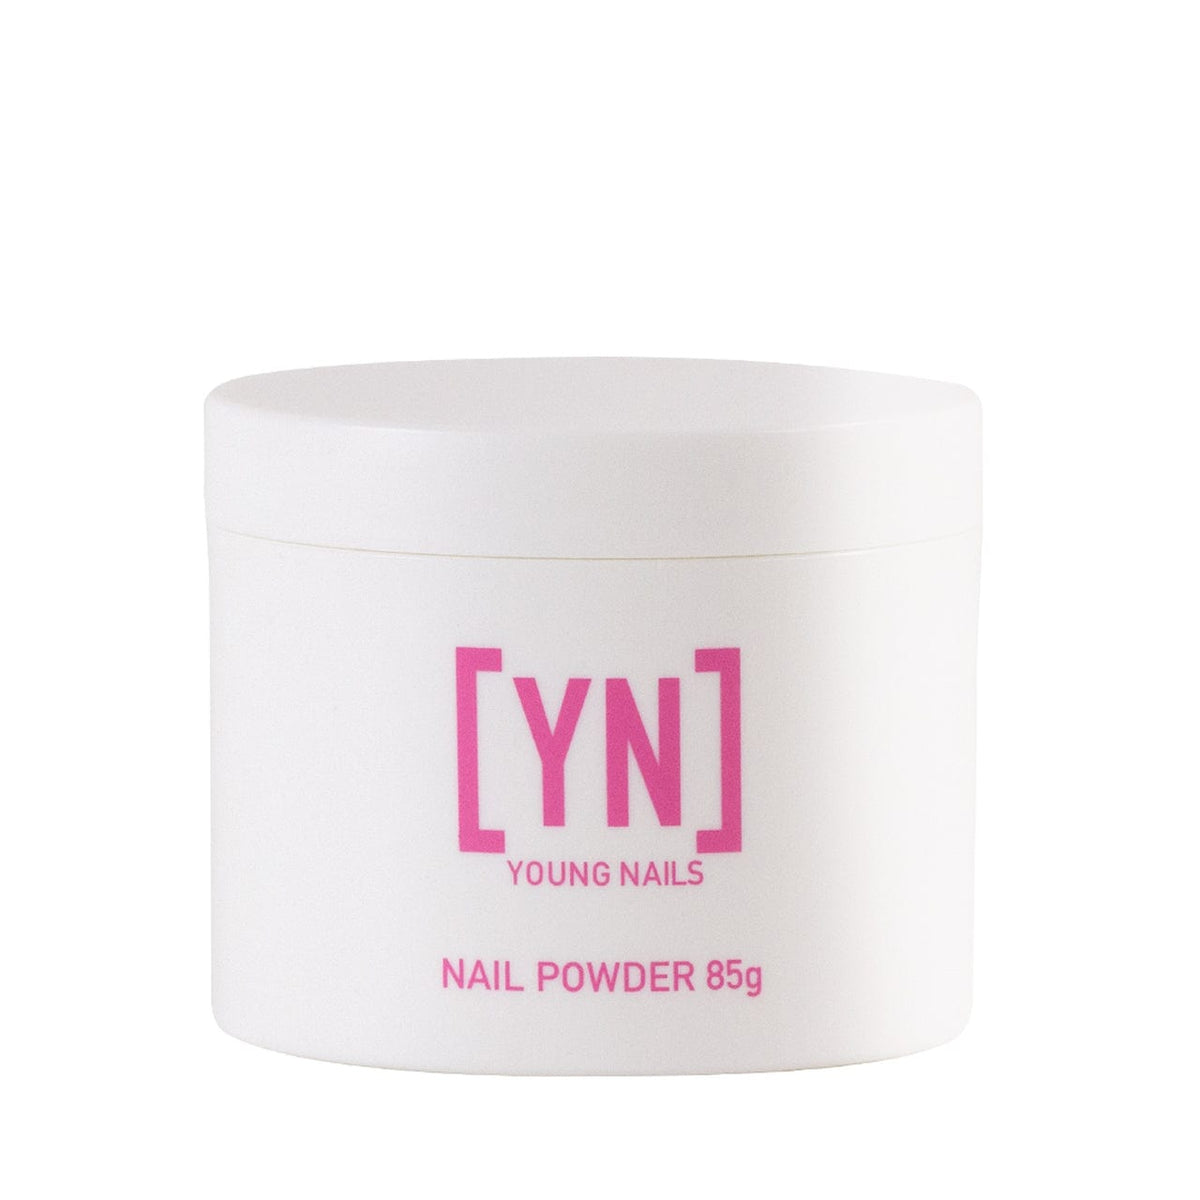 85g Speed Pink Powder Nails - Young Nails - Luxe Pacifique